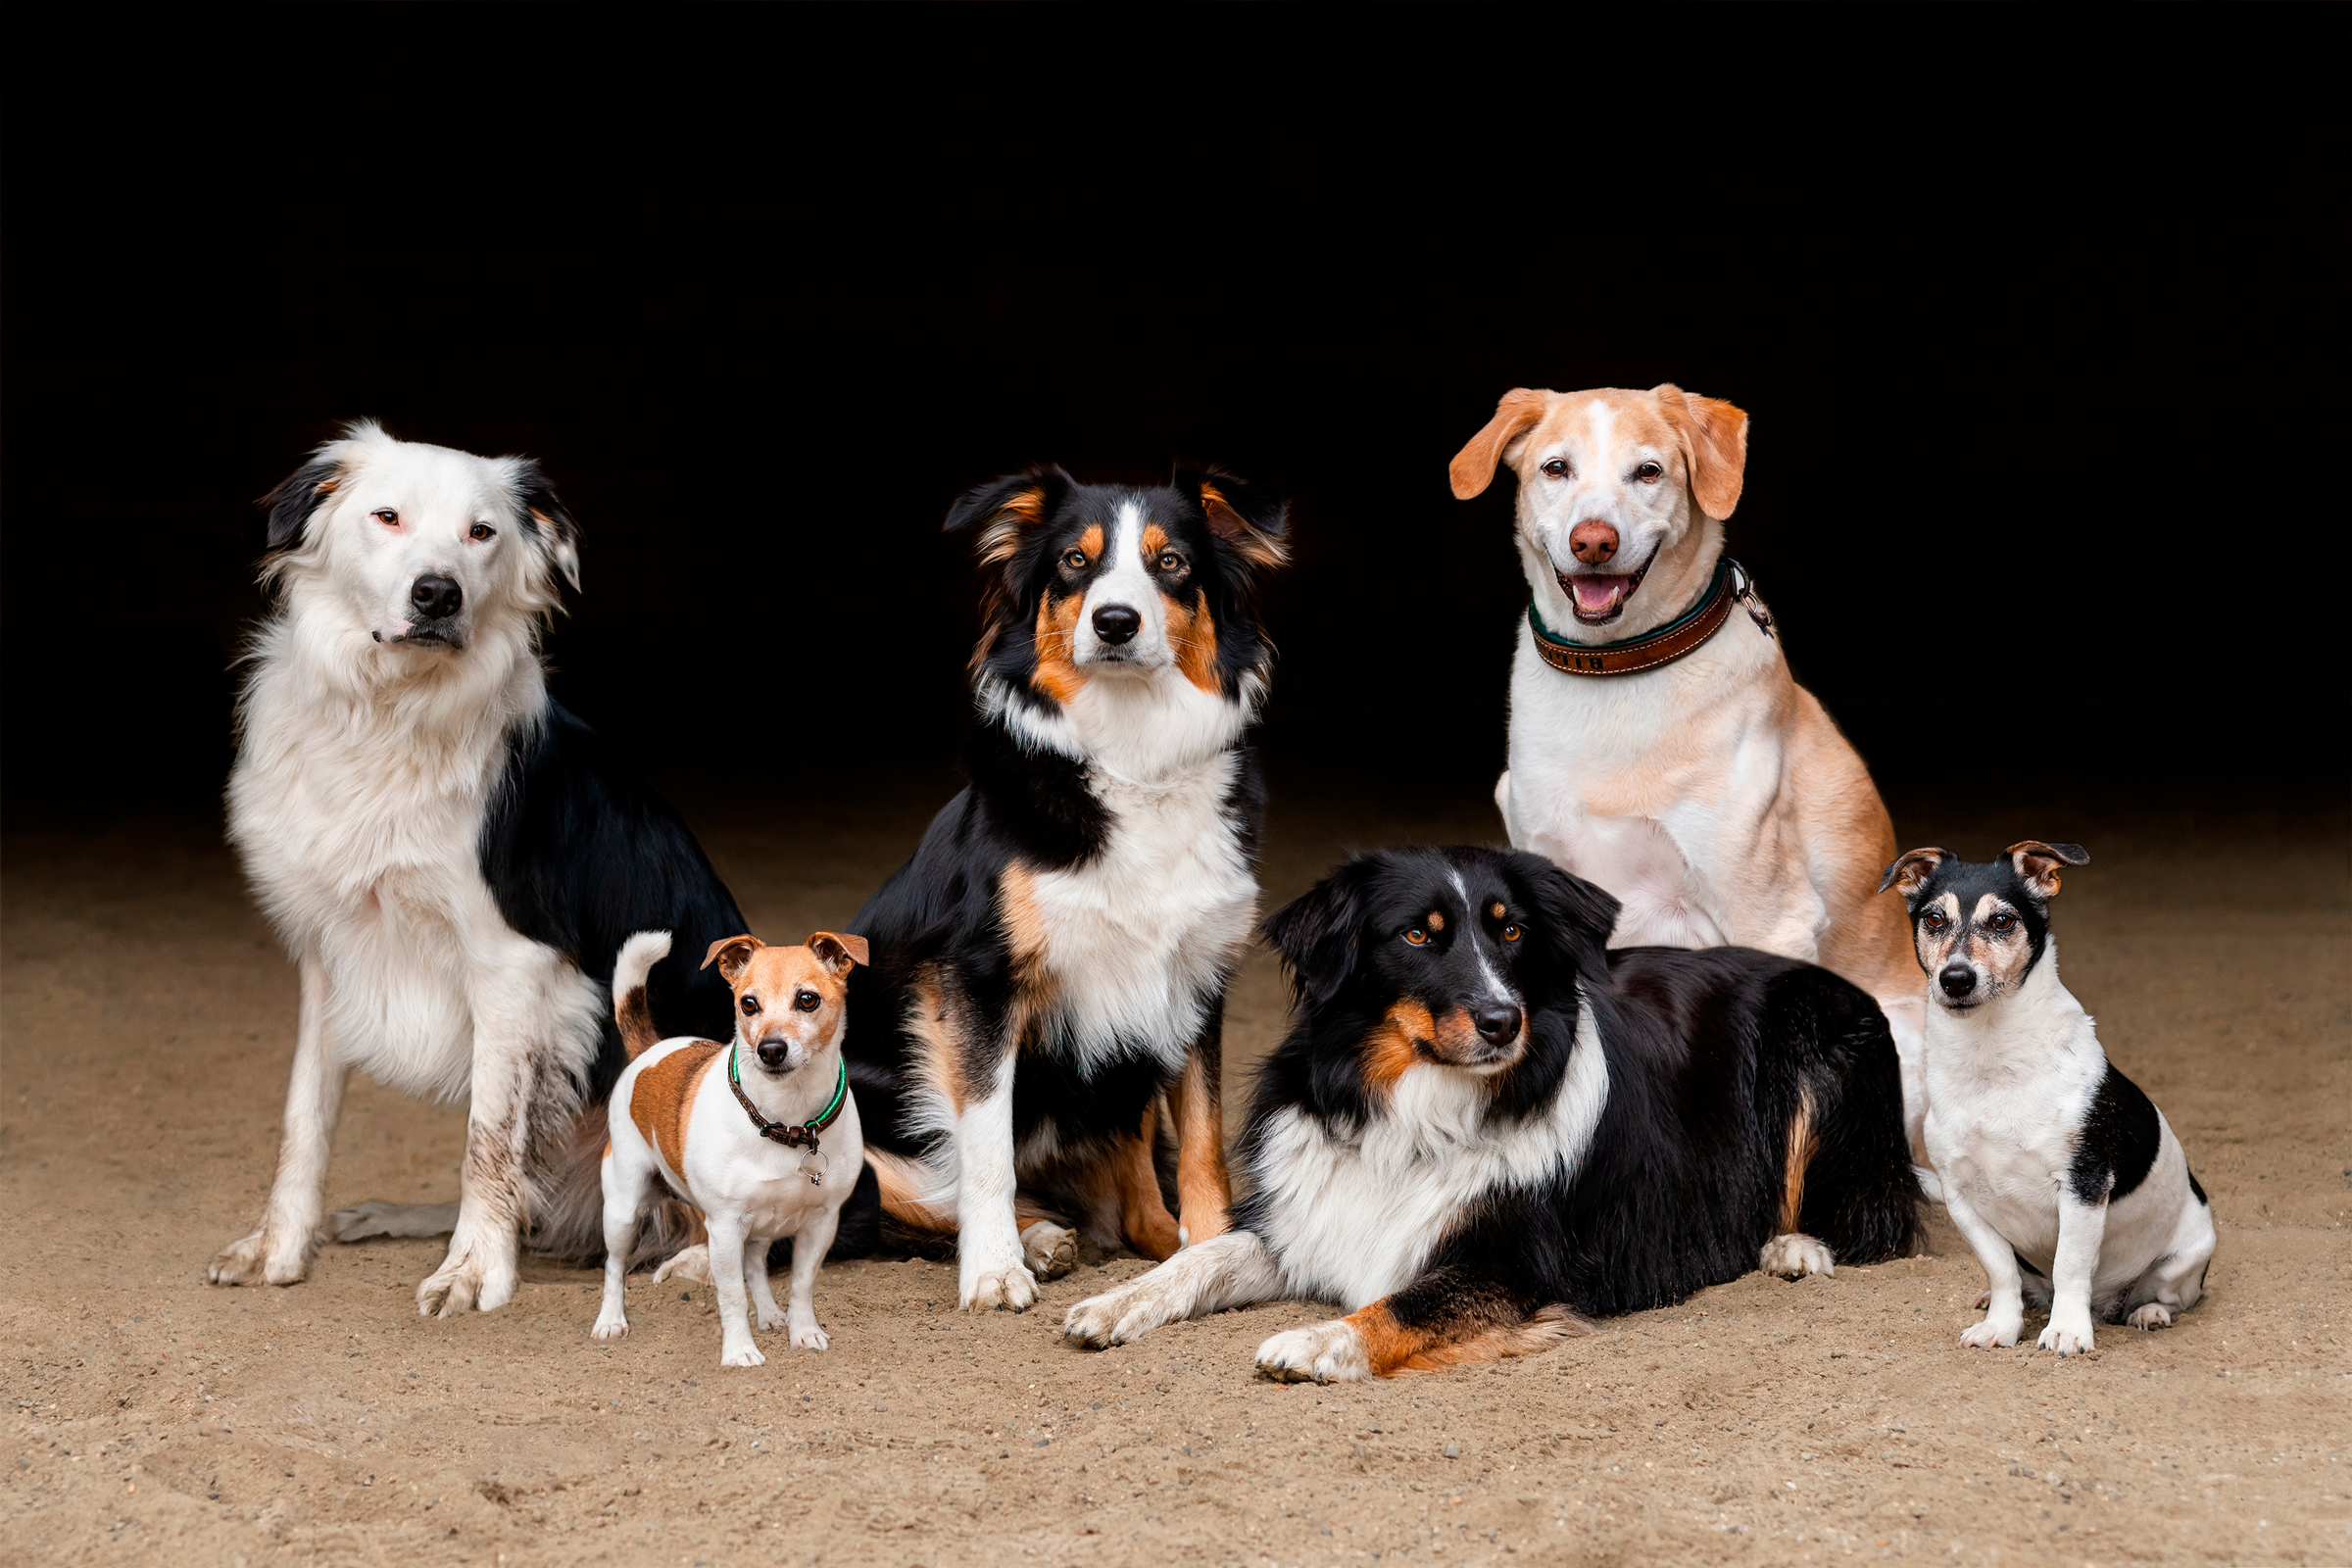 Group pet photo of 6 dogs, border collie, lab and jack russells.